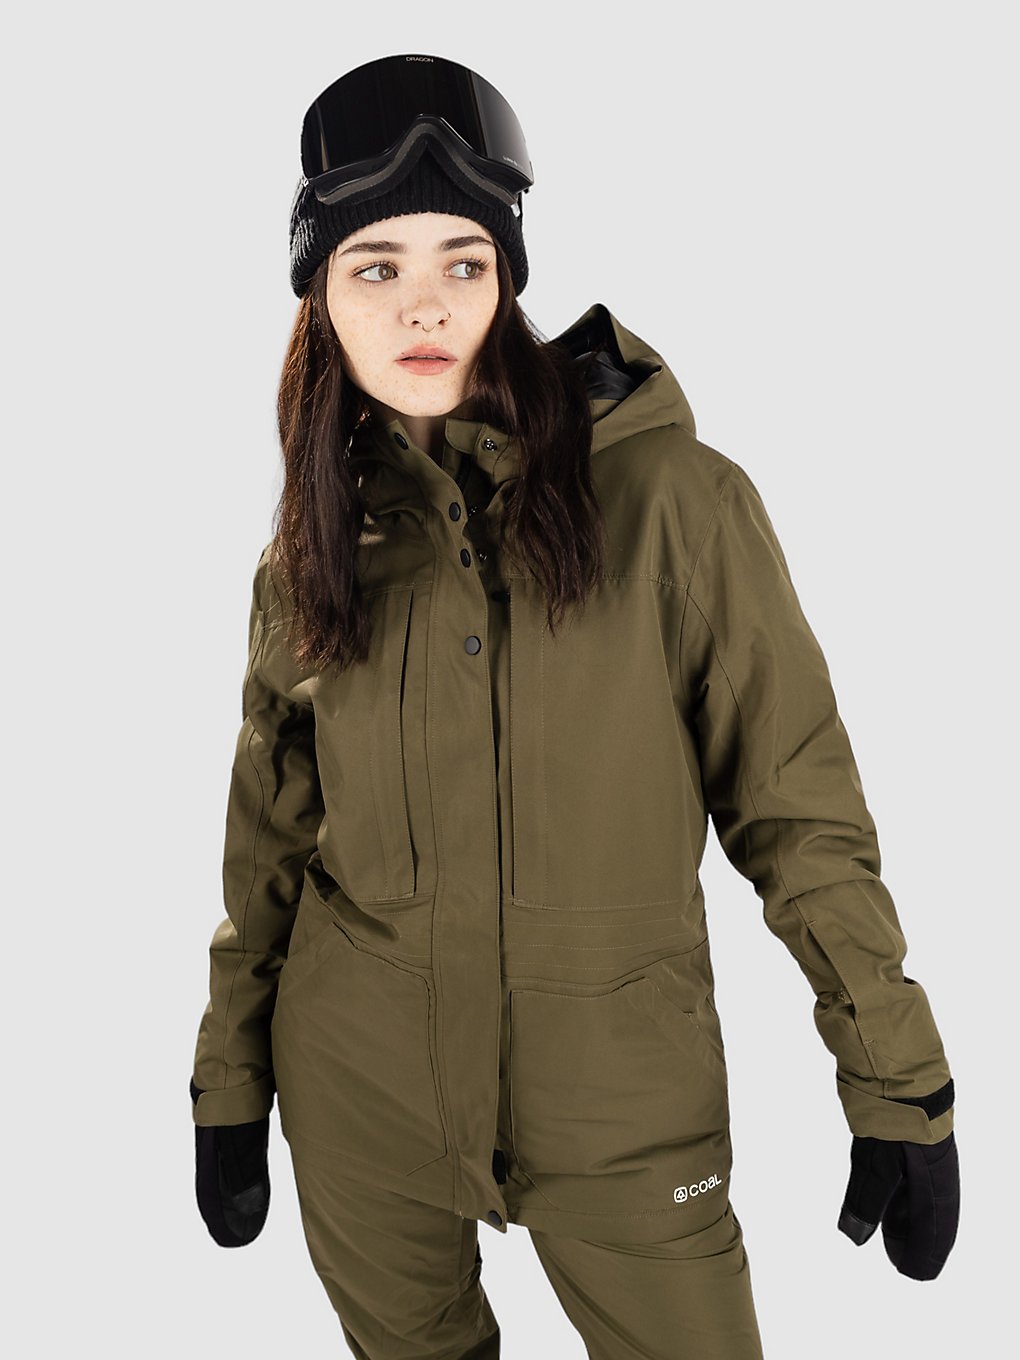 Coal Warbonnet Insulated Jacke olive kaufen